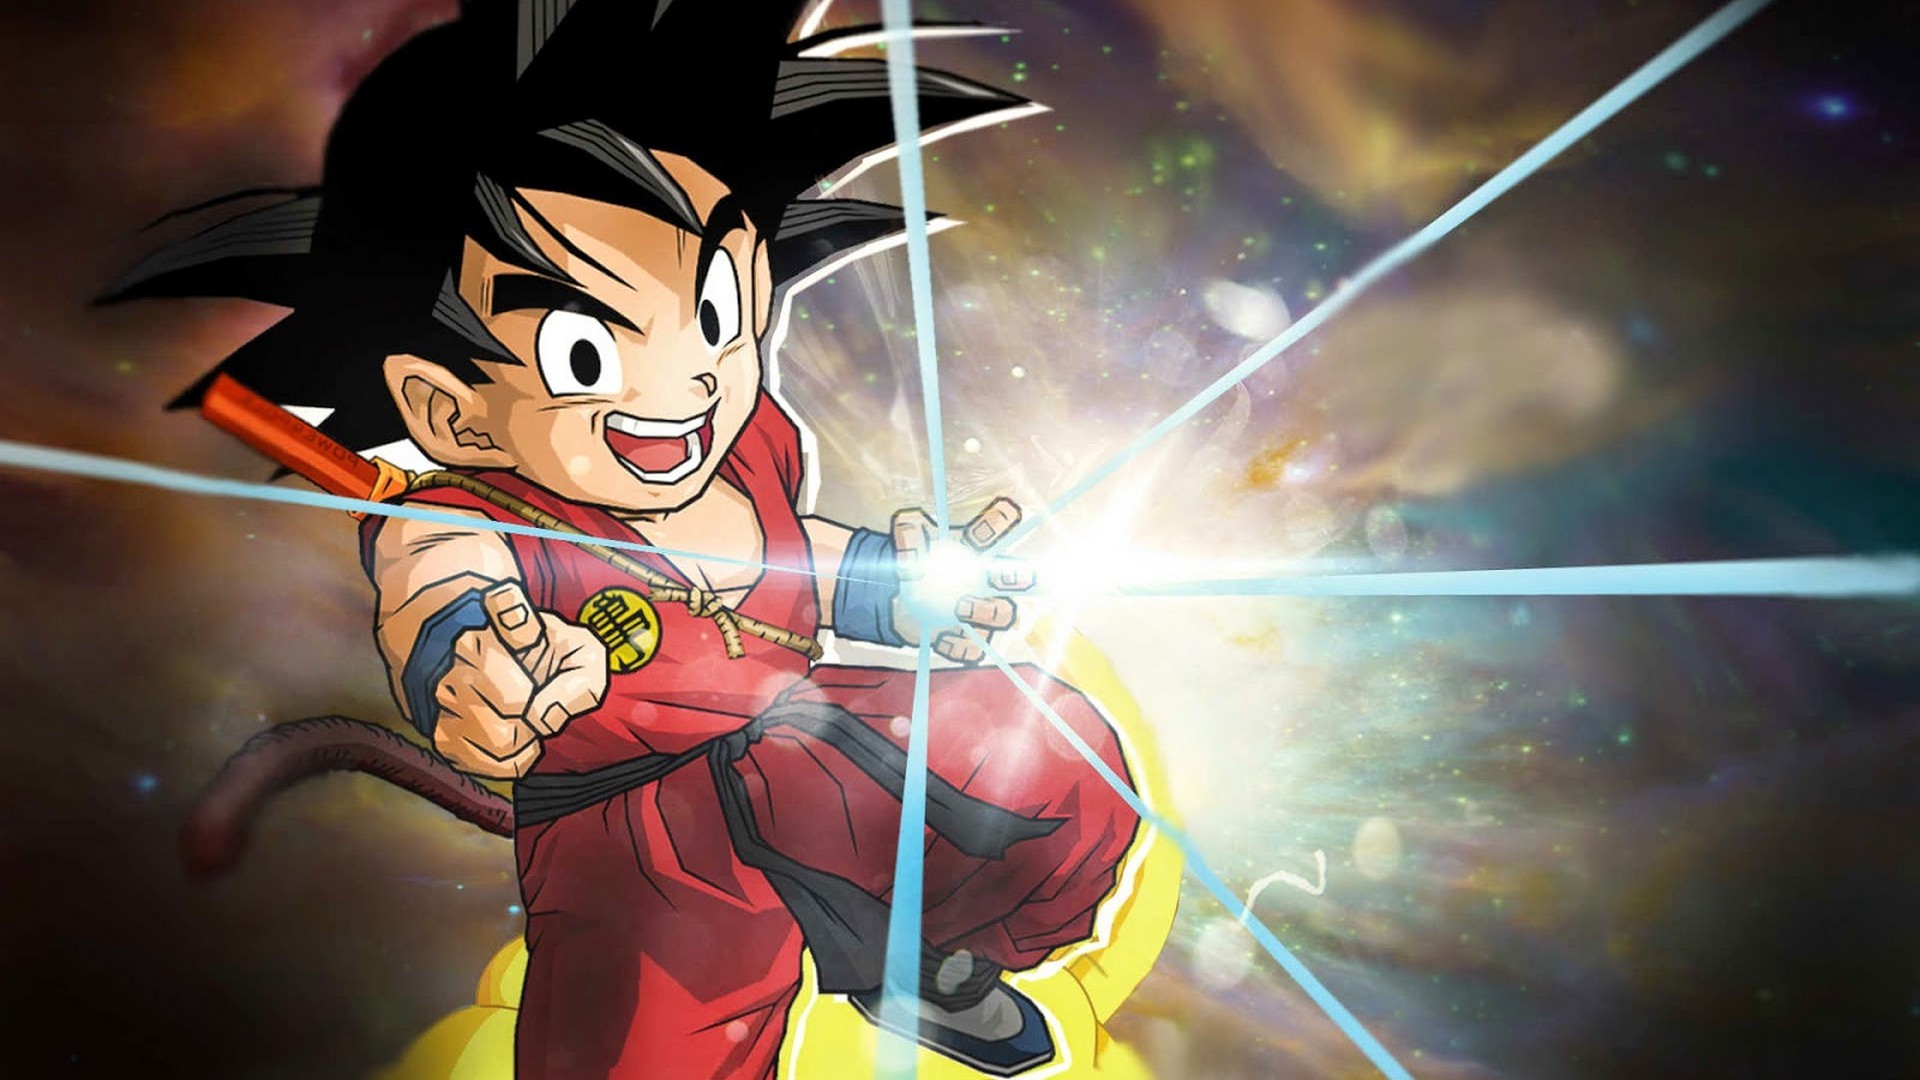 Kid Goku Wallpaper with resolution 1920X1080 pixel. You can use this wallpaper as background for your desktop Computer Screensavers, Android or iPhone smartphones